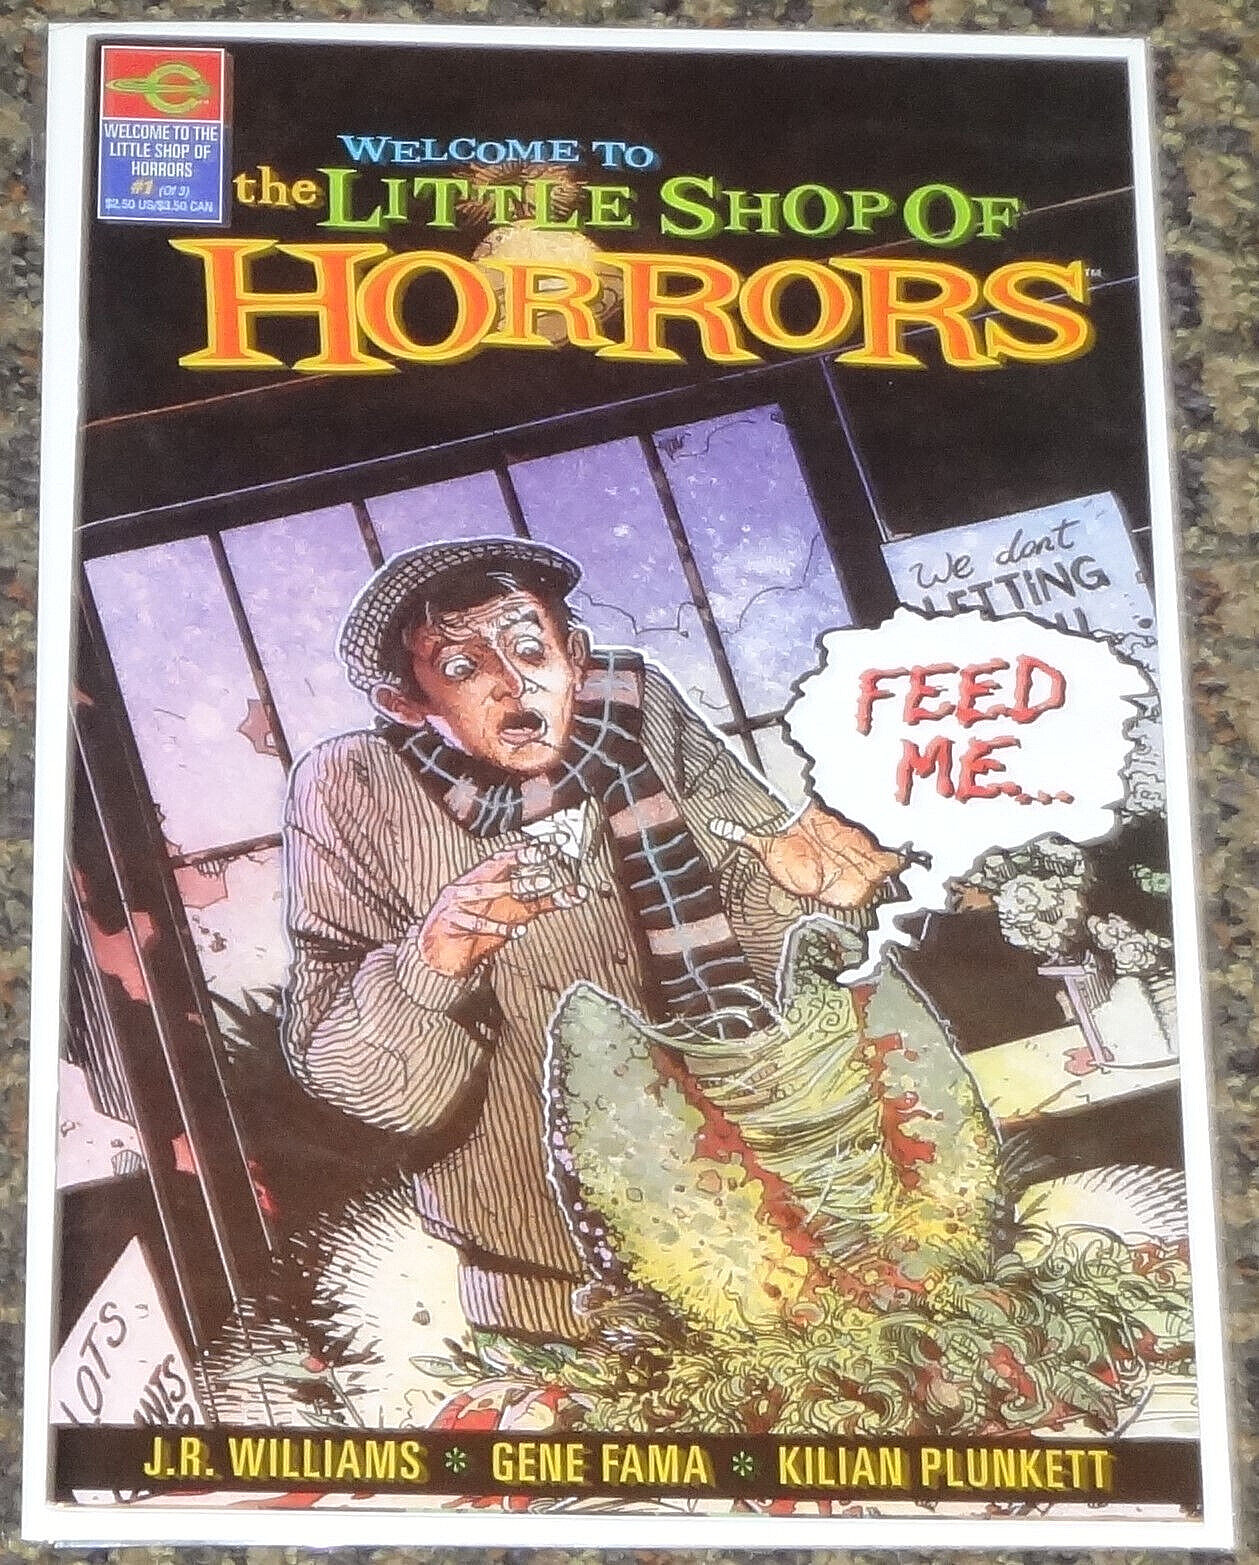 1995 COSMIC COMICS WELCOME TO THE LITTLE SHOP OF HORRORS #1 VF MOVIE ADAPTATION